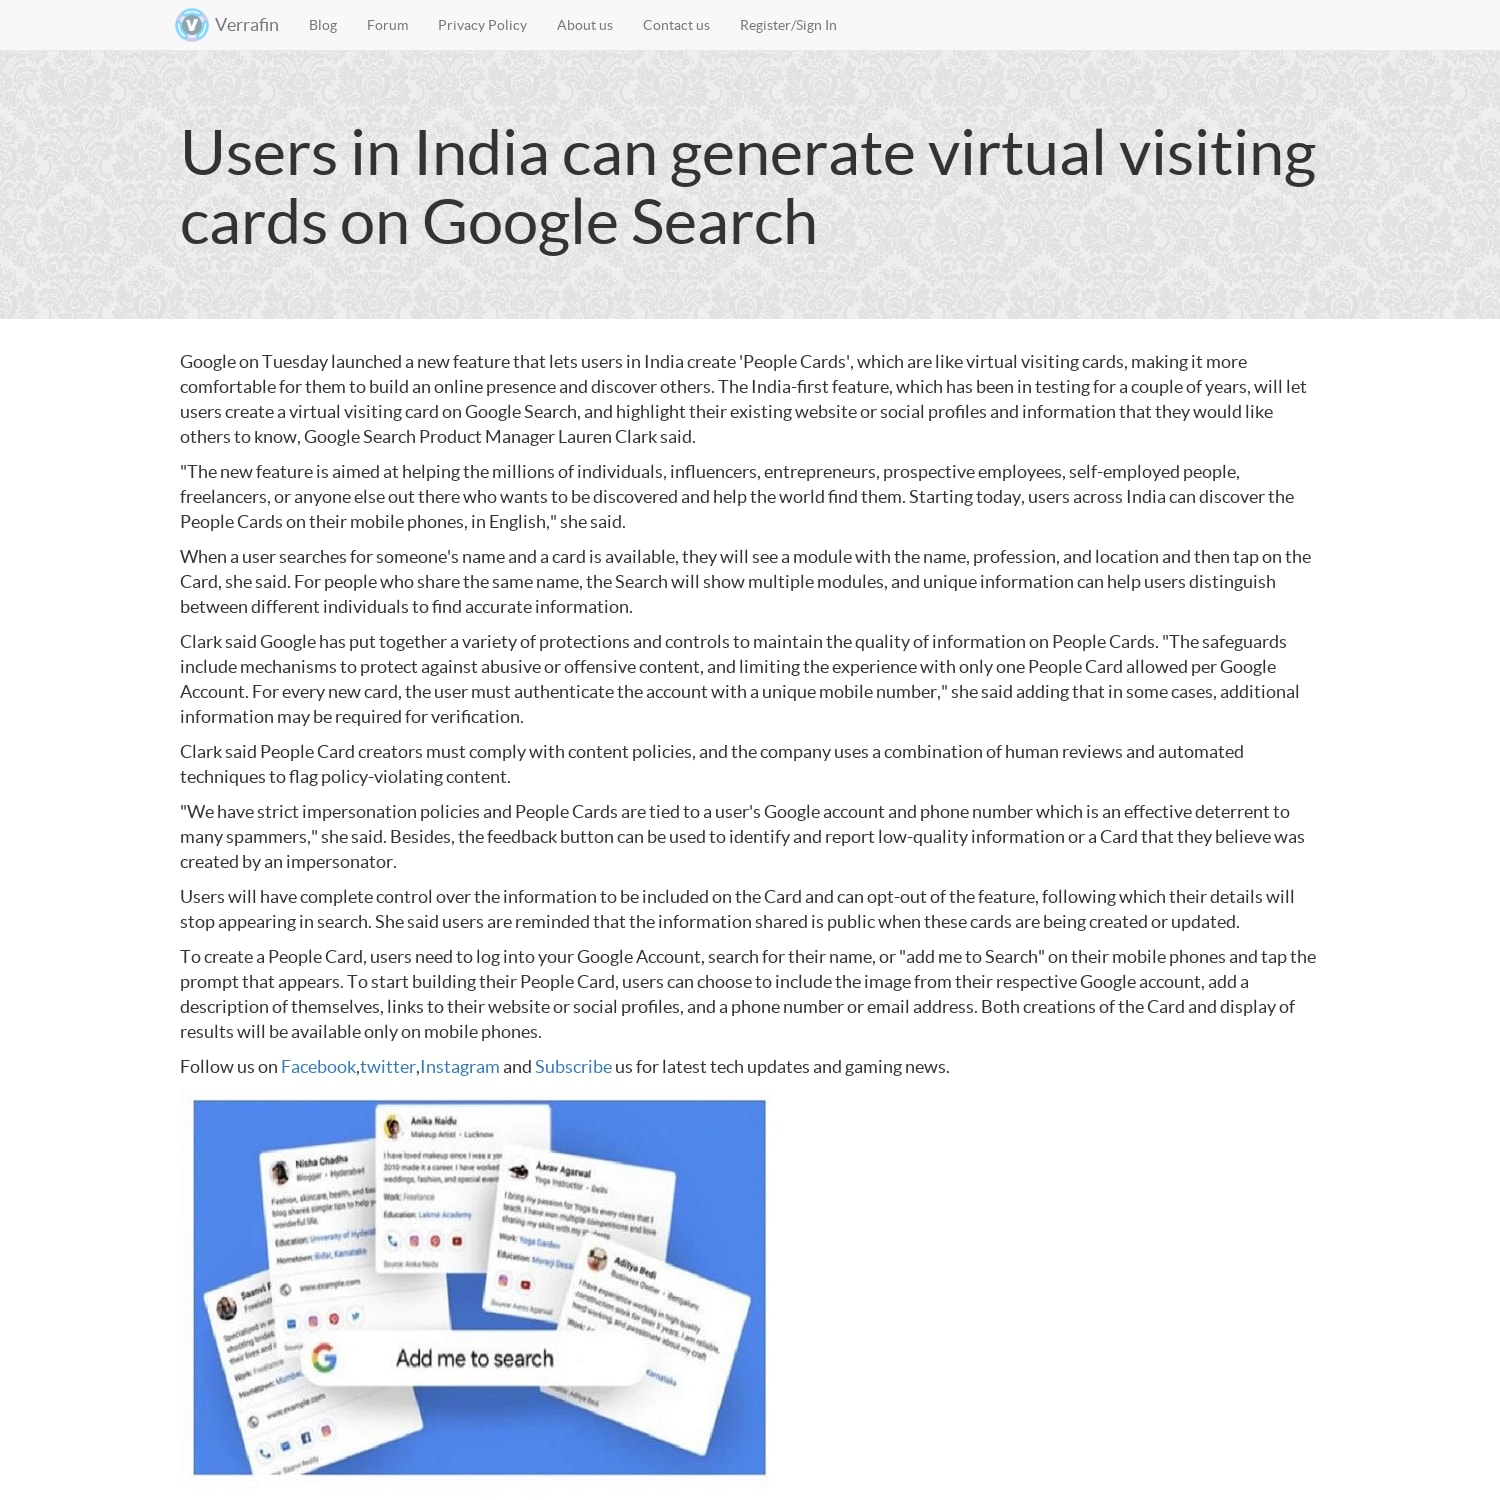 Users in India can generate virtual visiting cards on Google Search